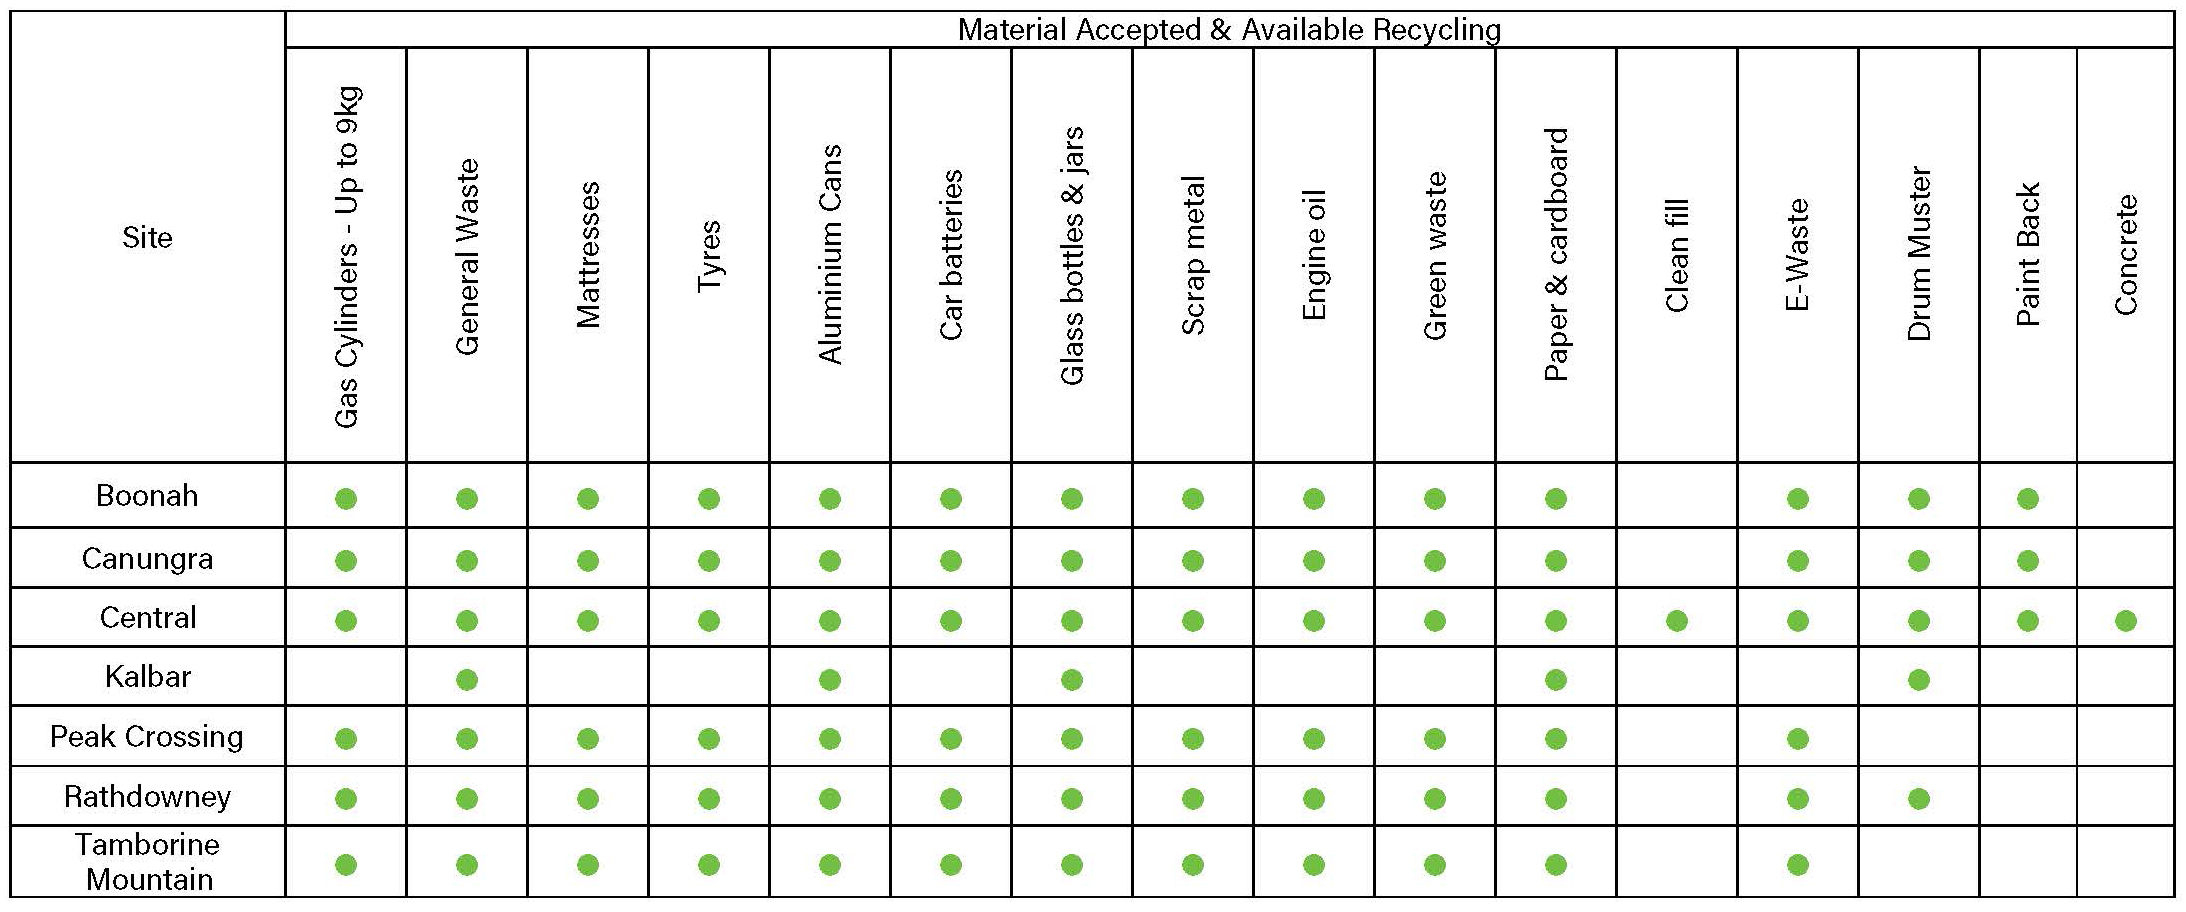 Accepted waste material graphic